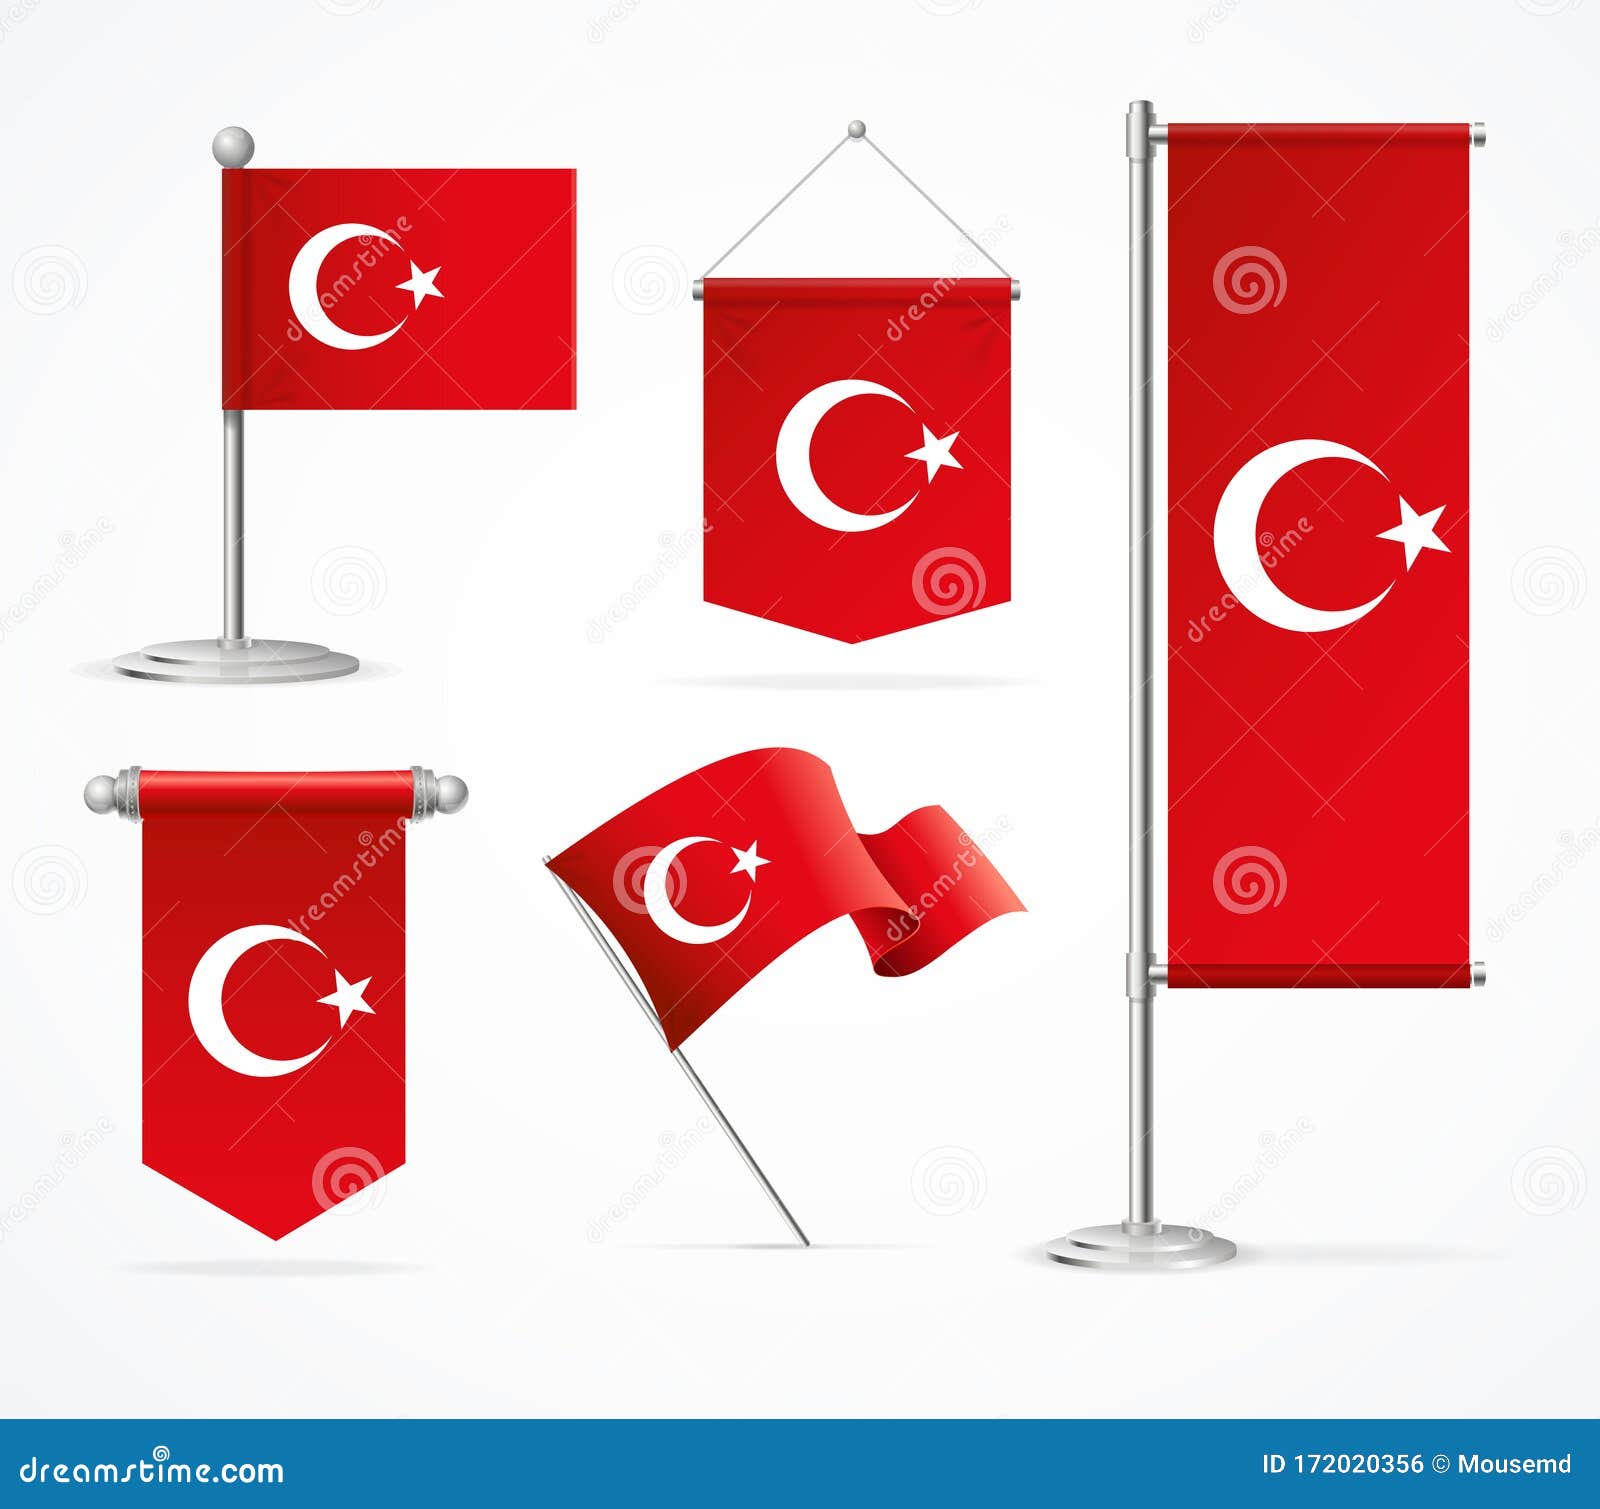 Download Realistic 3d Detailed Turkey Flag Banner Set. Vector Stock Vector - Illustration of pennant ...